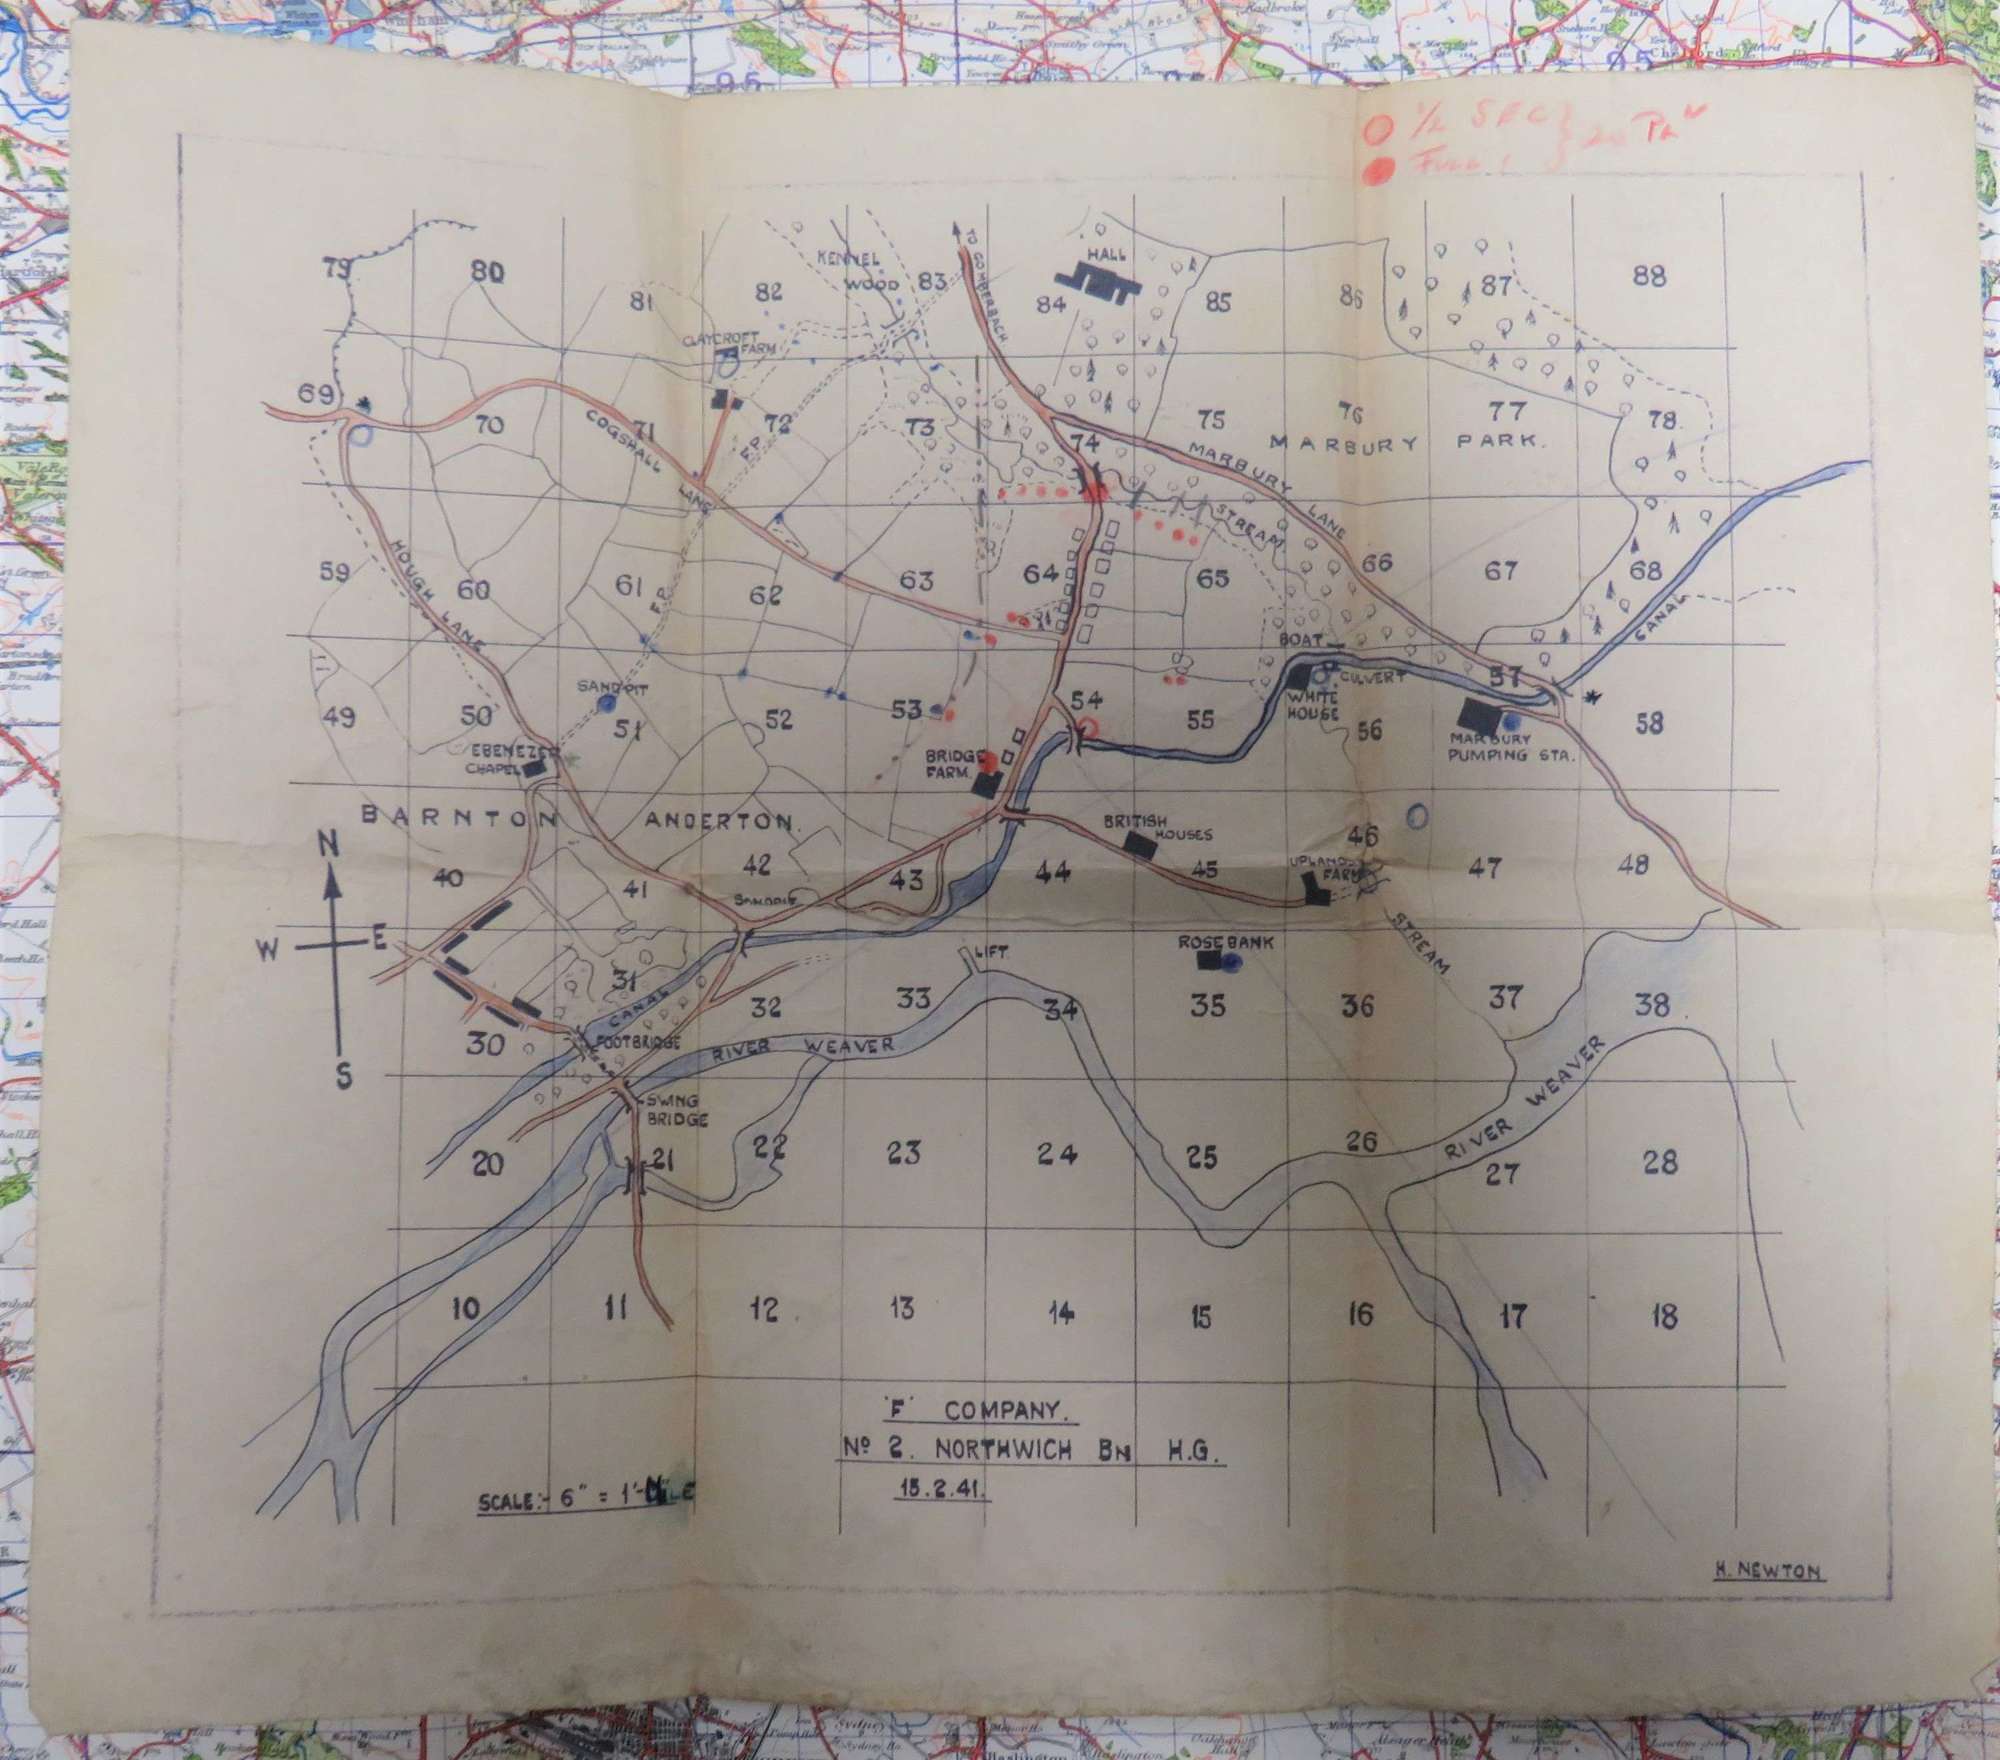 Original No2 Northwich Bn Cheshire Home Guard Exercise Map